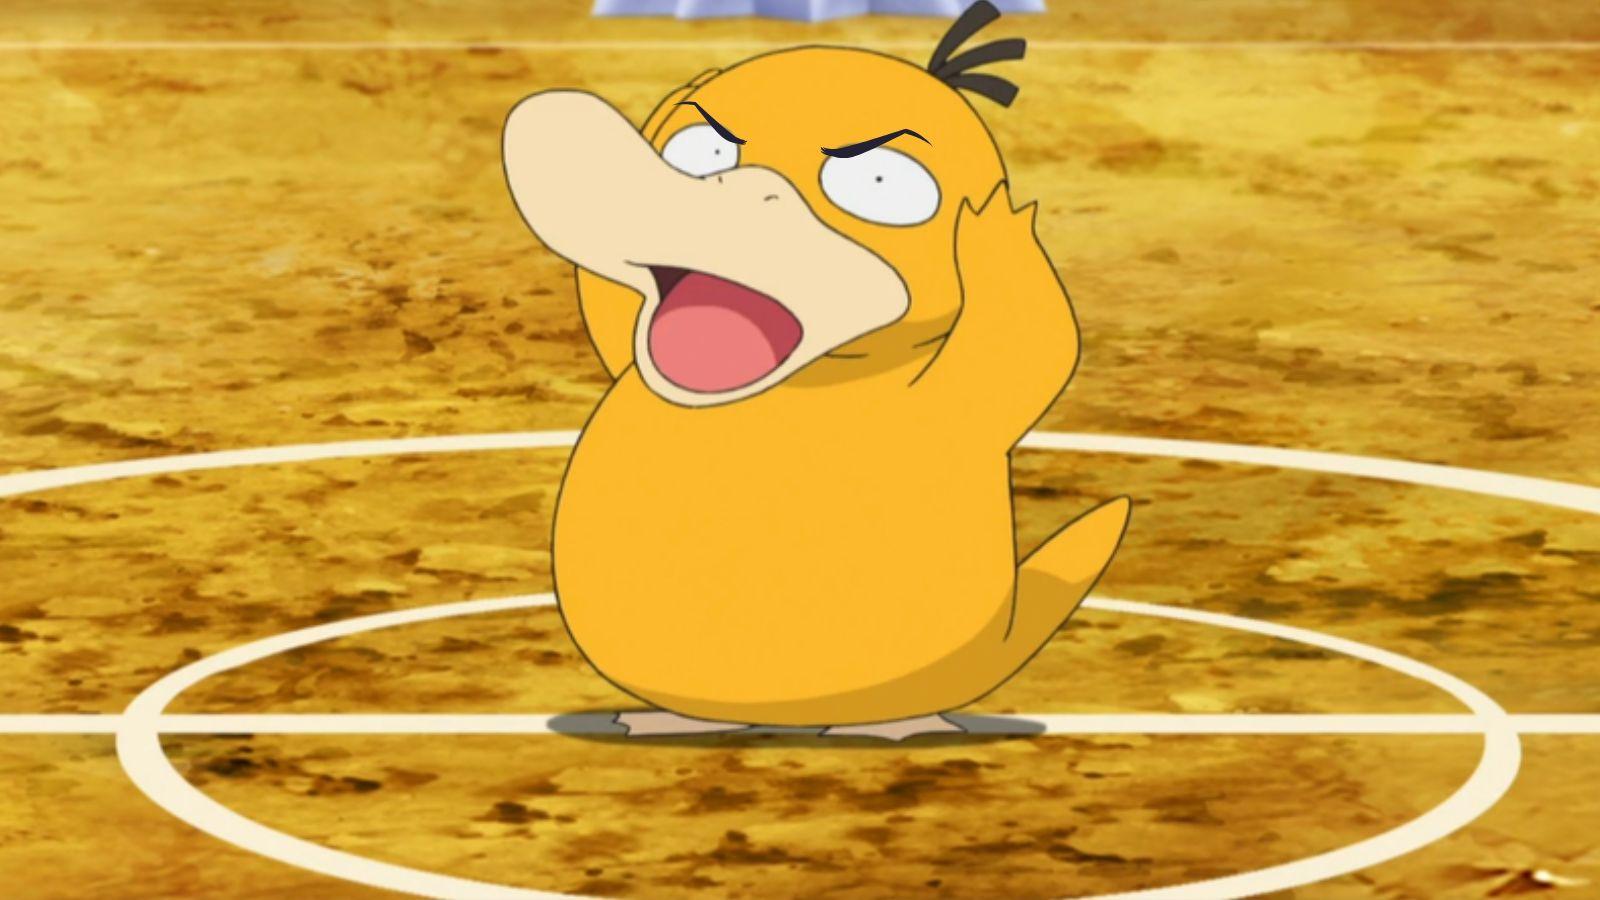 Psyduck Pokemon with angry eyebrows.